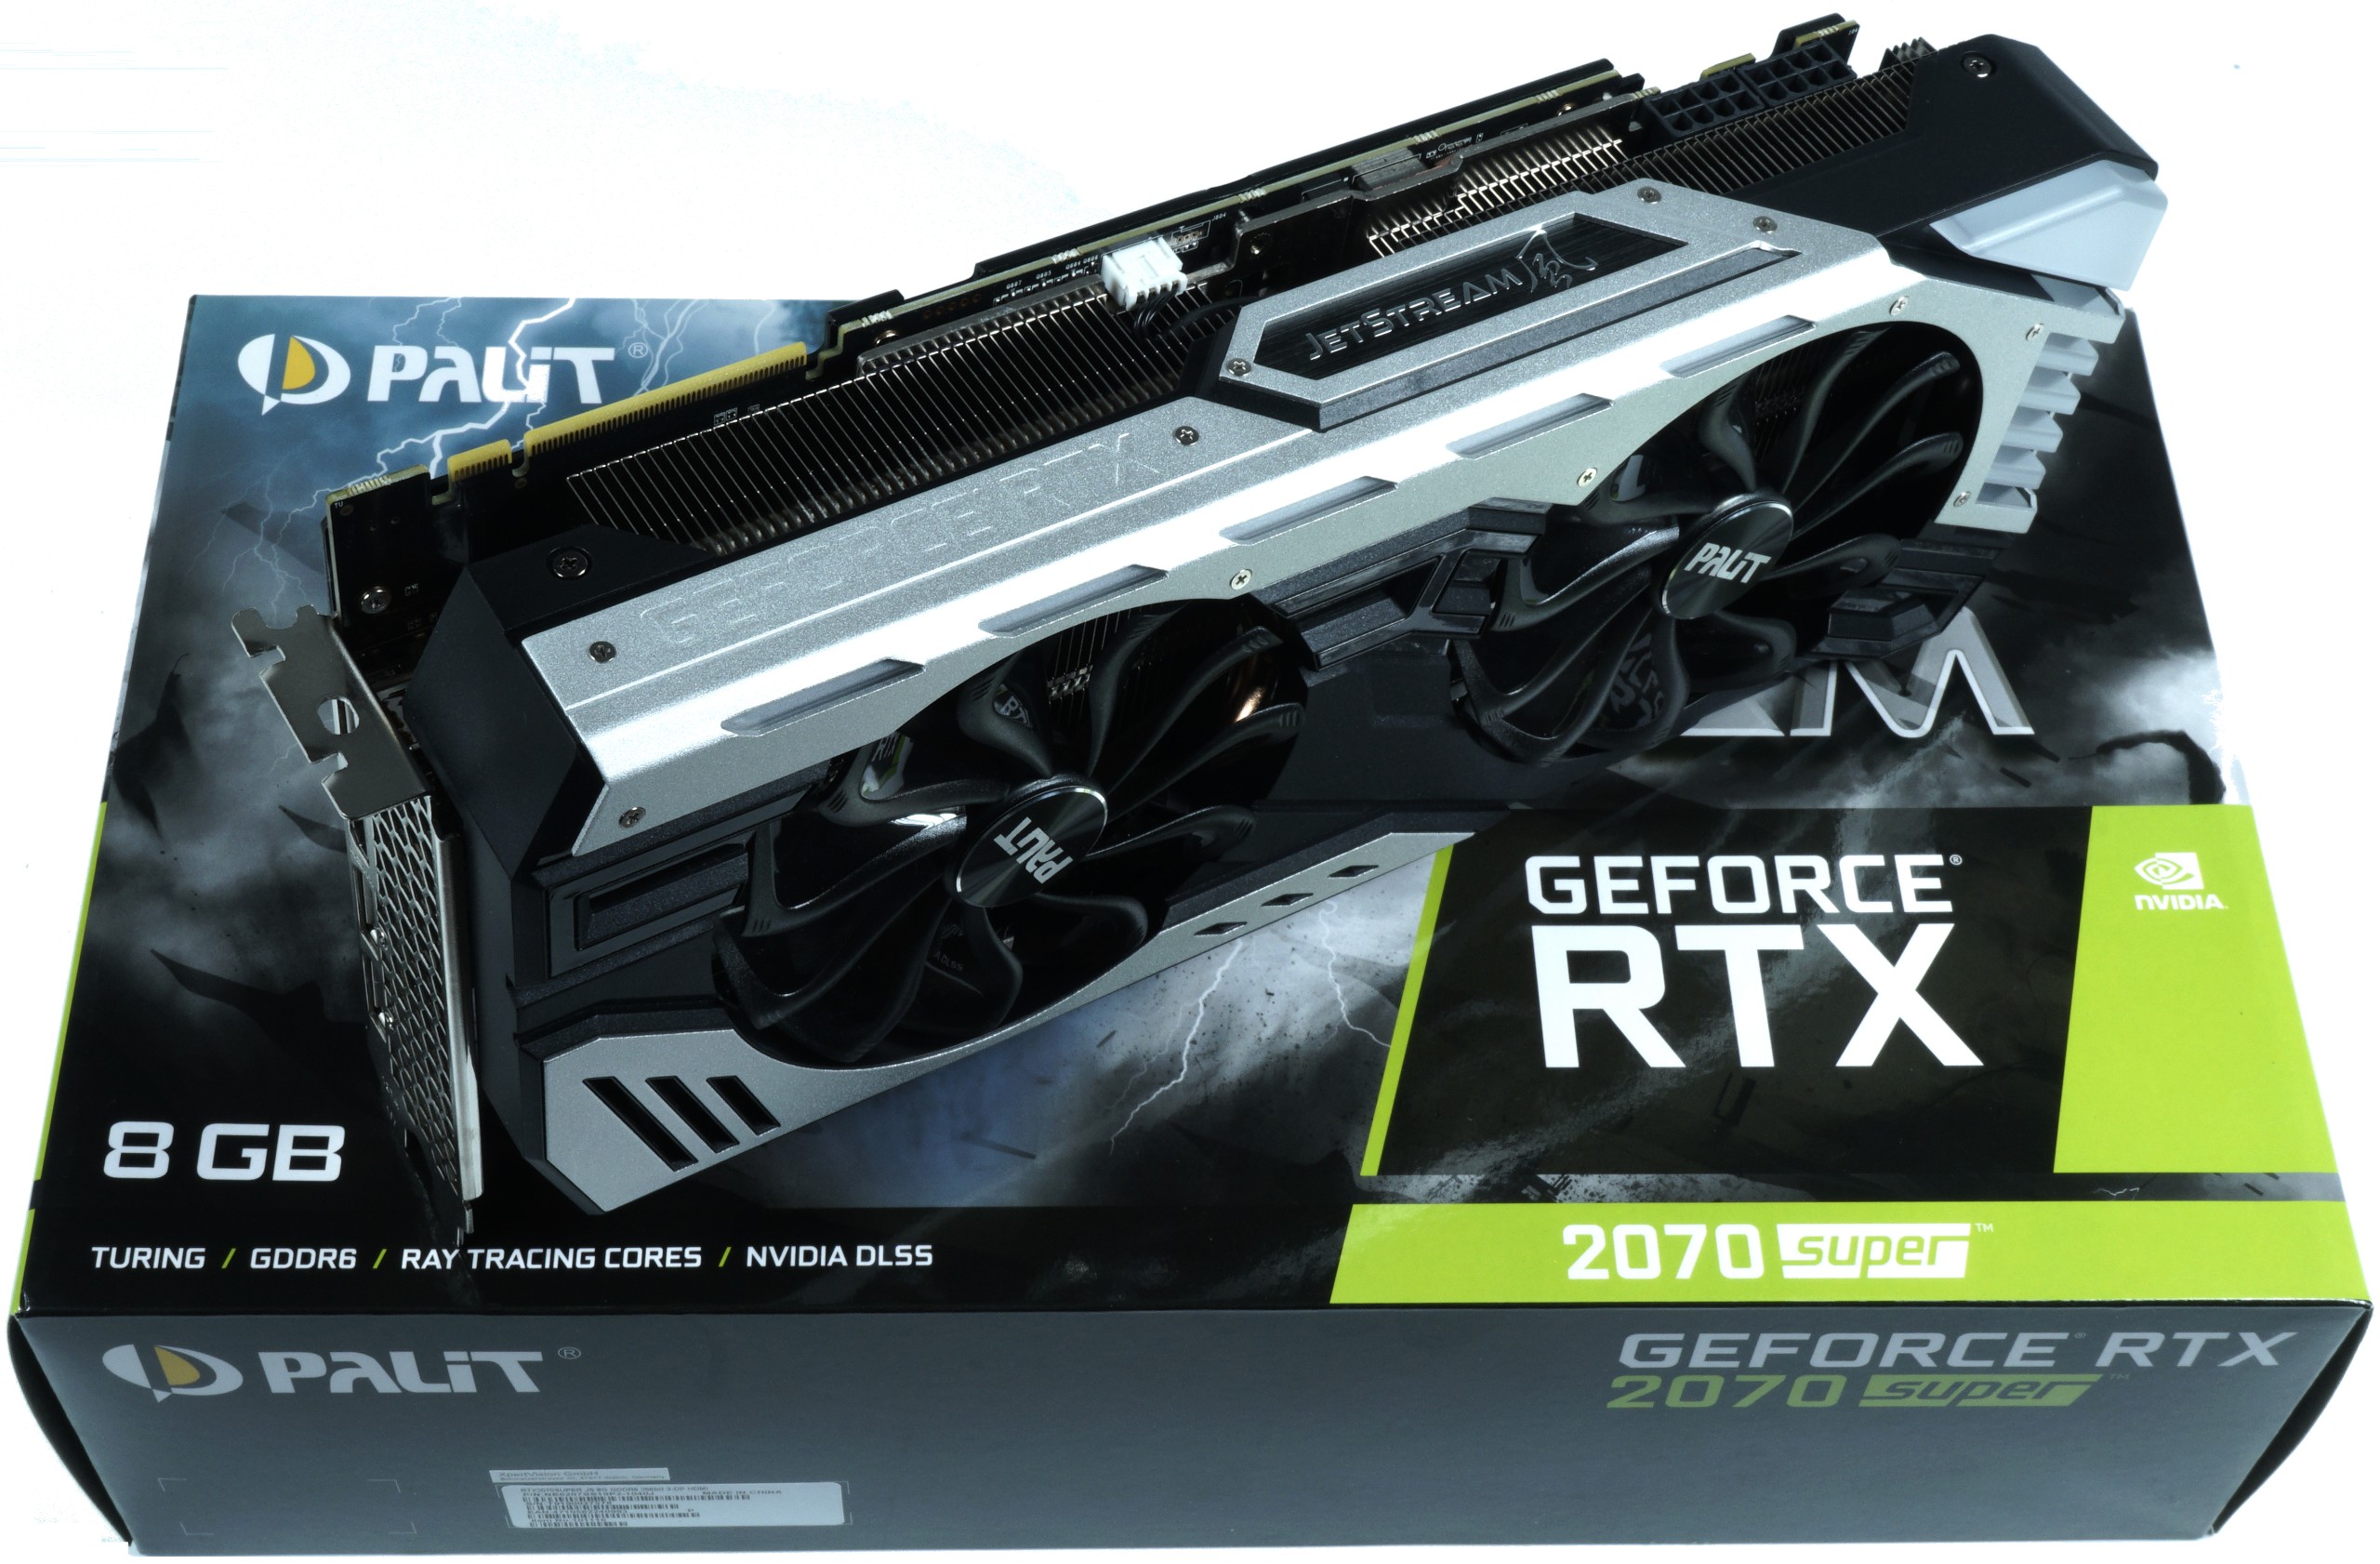 Palit RTX 2070 Super Jetstream review - Almost silent and 